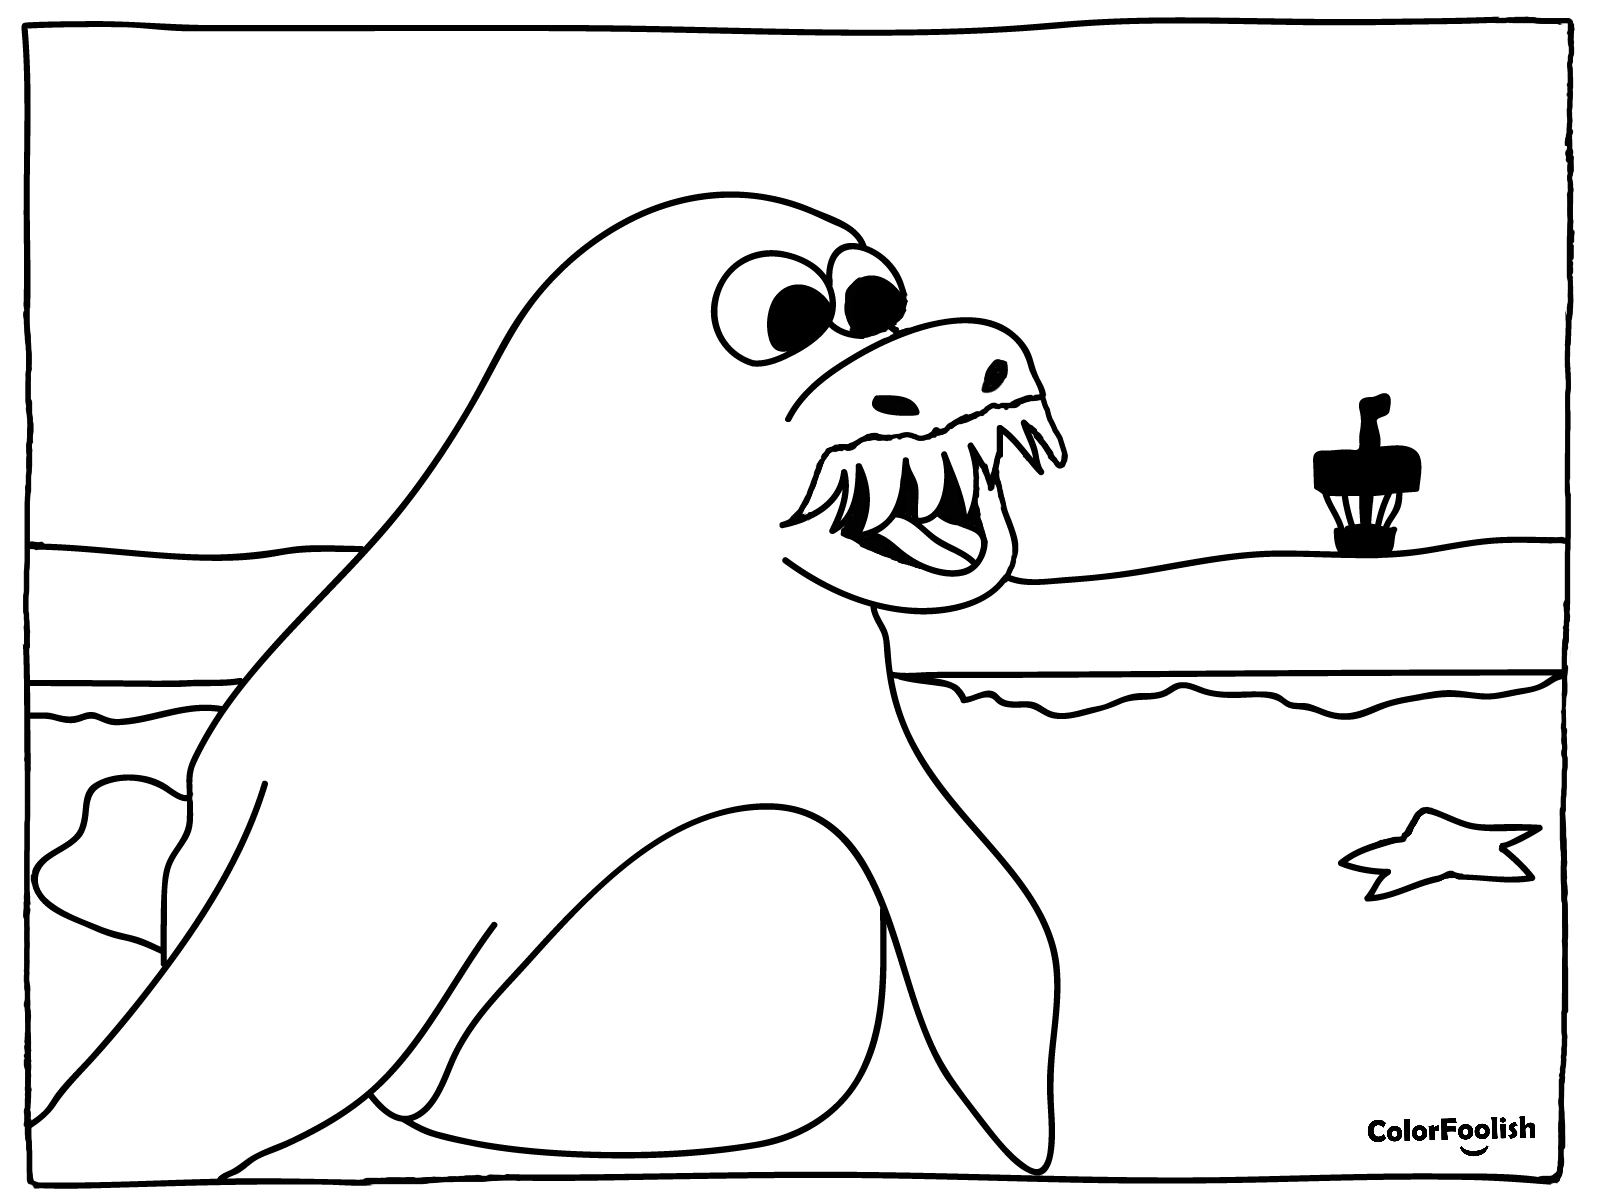 Coloring page of a walrus on the beach